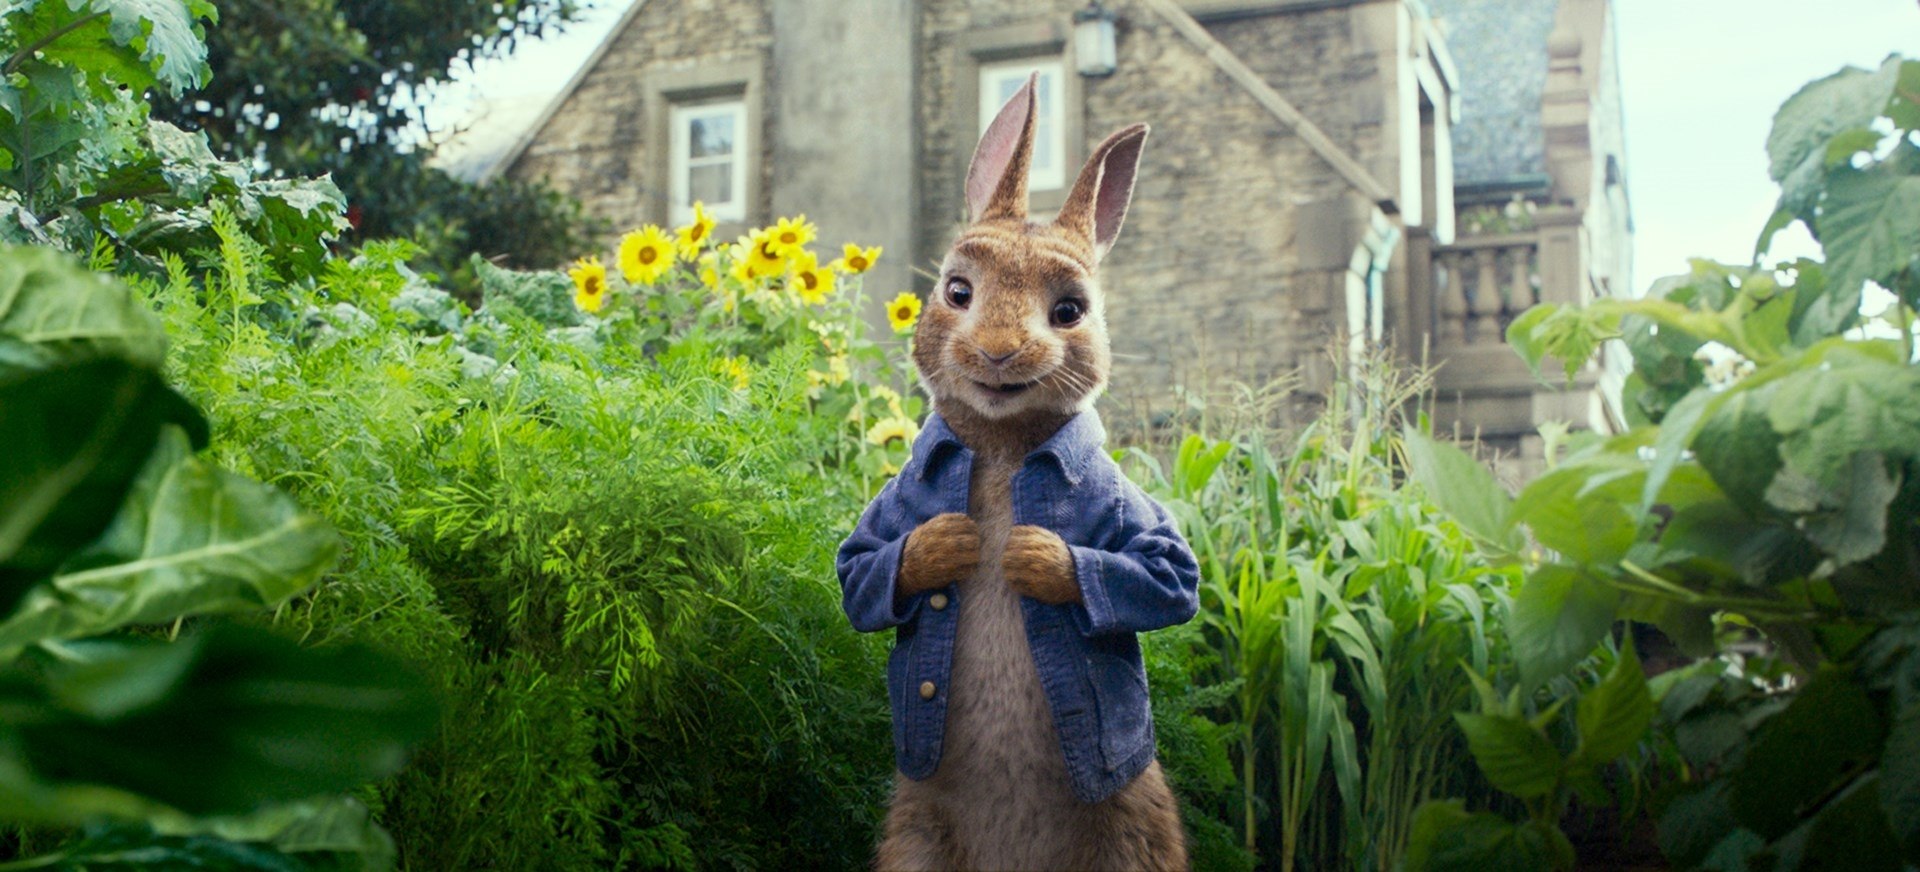 Peter Rabbit - movie: where to watch streaming online